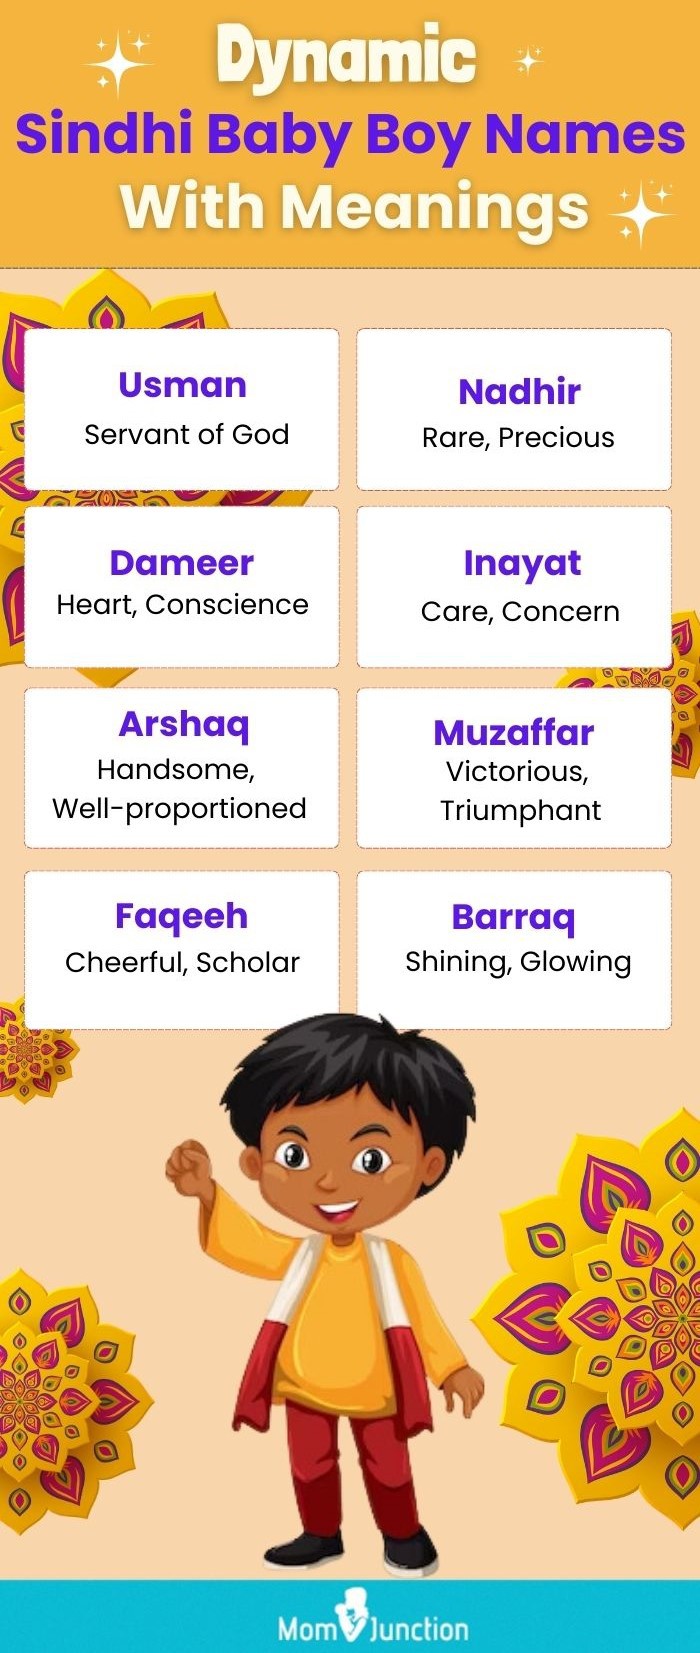 dynamic sindhi baby boy names with meanings (infographic)